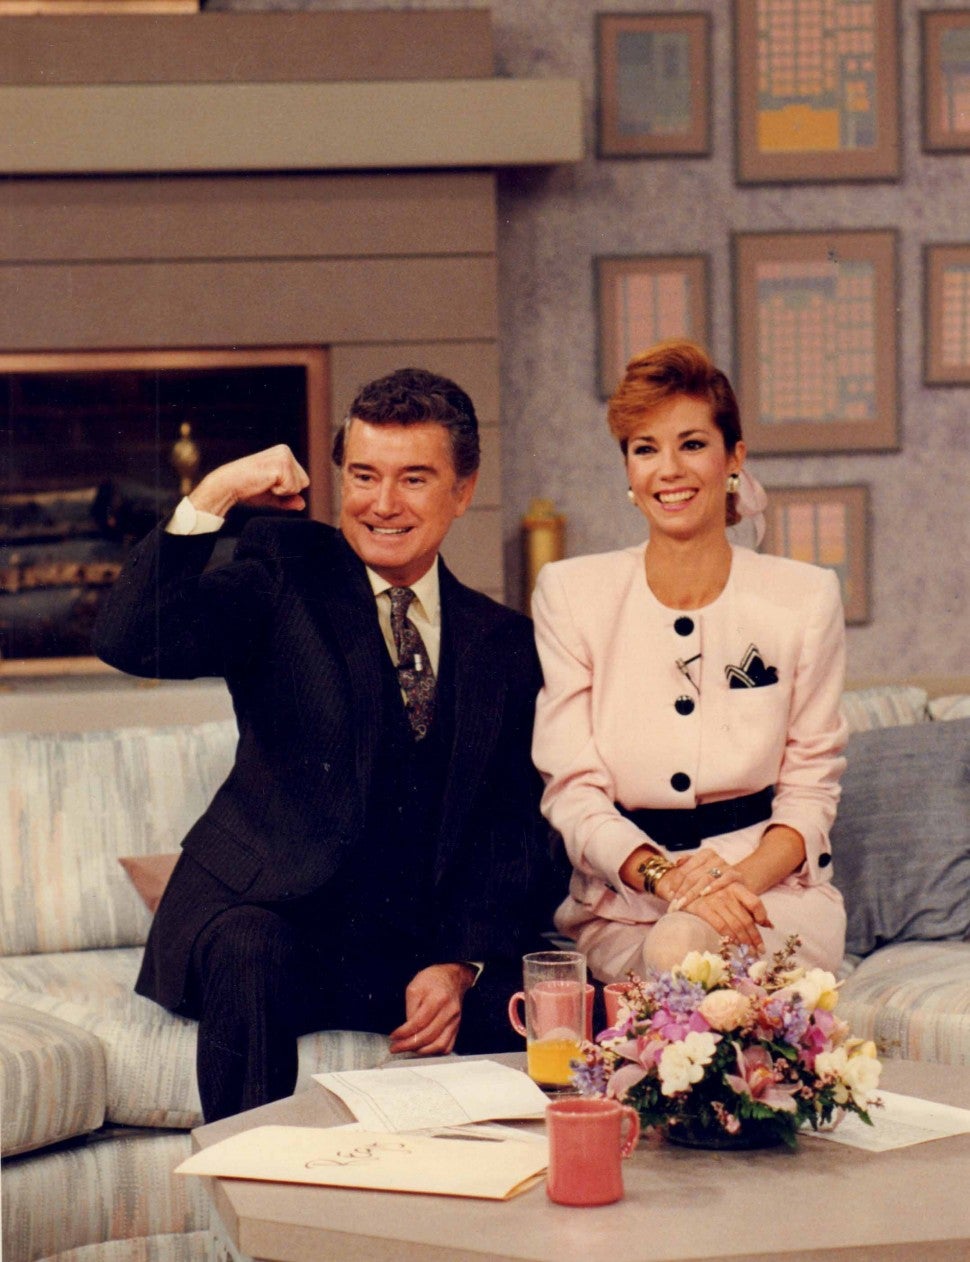 Regis Philbin and Kathie Lee Gifford on the set of "Live with Regis and Kathie Lee" on WABC television in New York on April 25, 1988. 